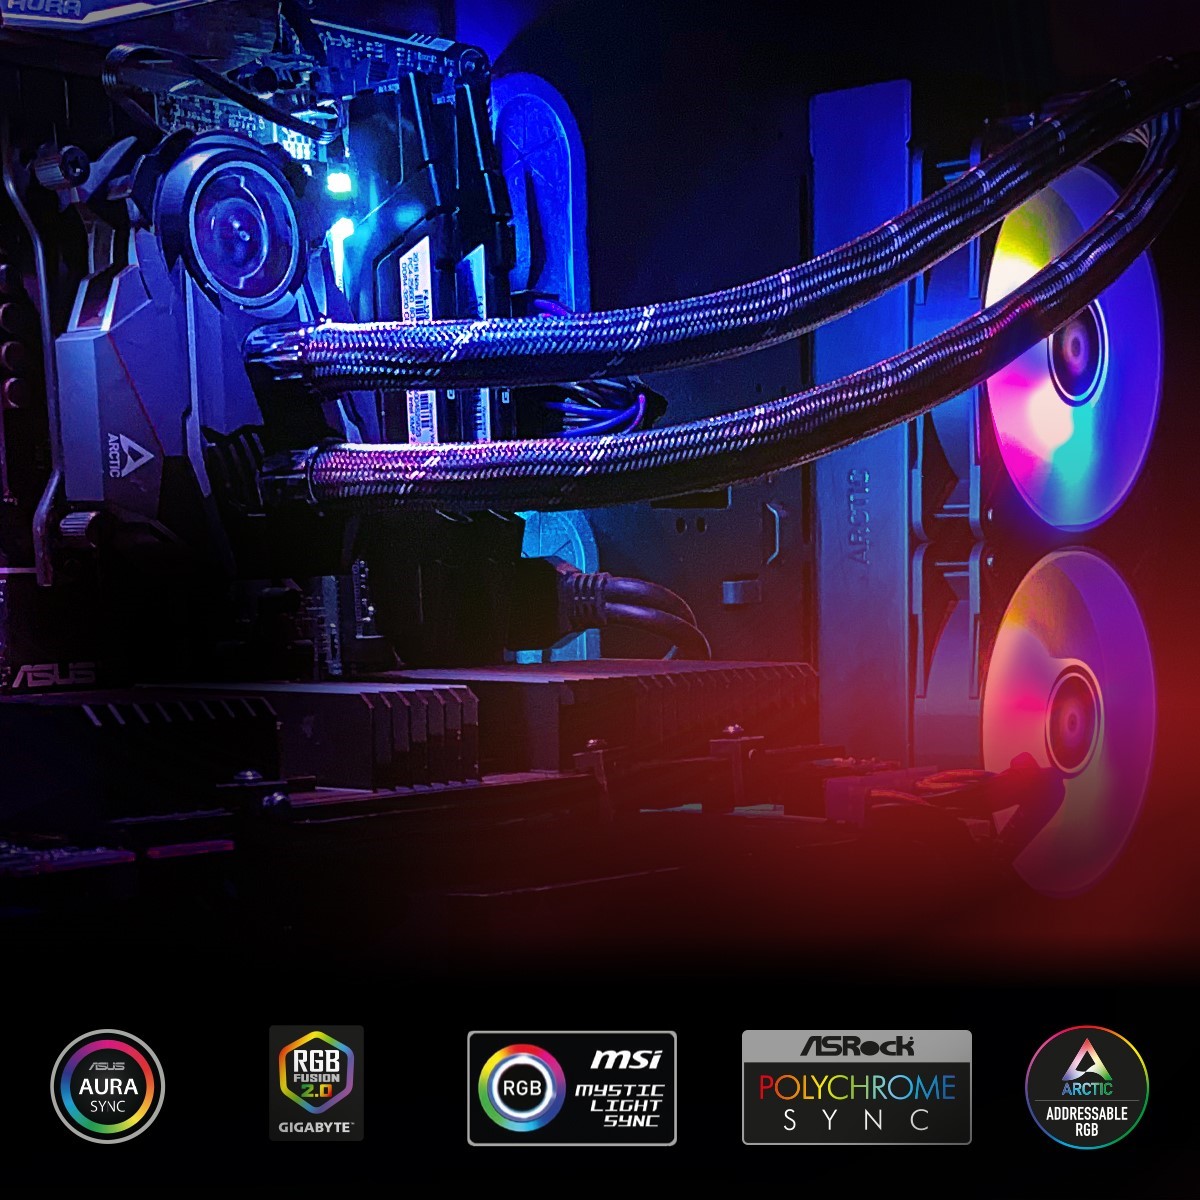 Arctic Liquid Freezer II 420 A-RGB - Multi-Compatible All-in-one CPU AIO  Water Cooler with A-RGB, efficient PWM-Controlled Pump, Fan Speed: 200-1900